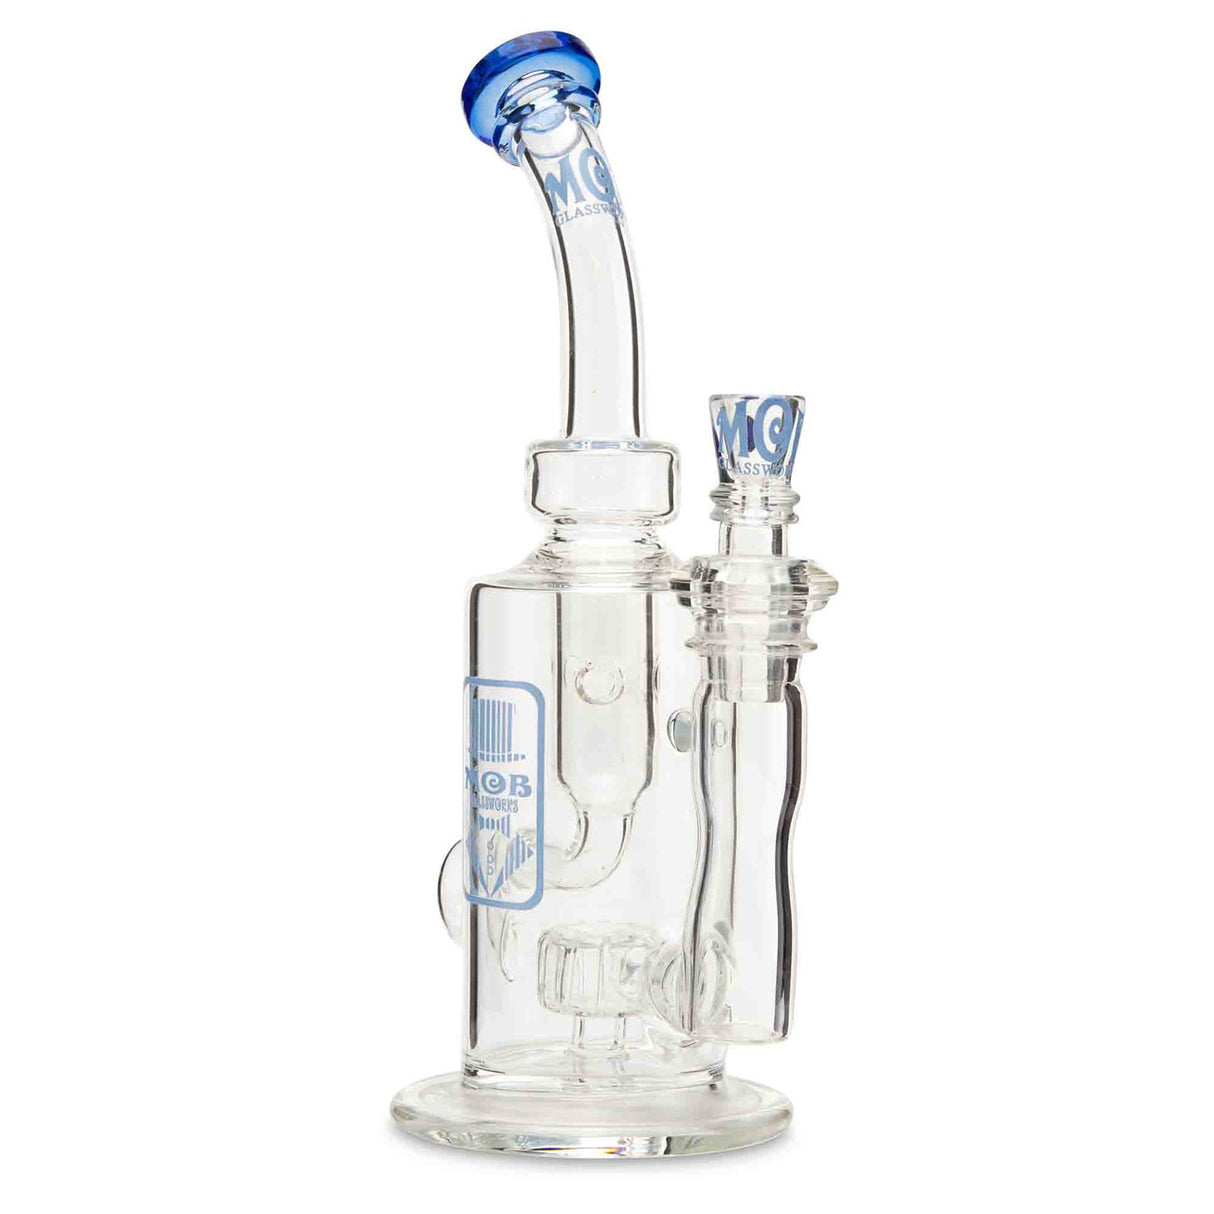 MOB Glass Internal Klein Recycler Rig  Premium Thick Scientific Glass Blue Dream Color